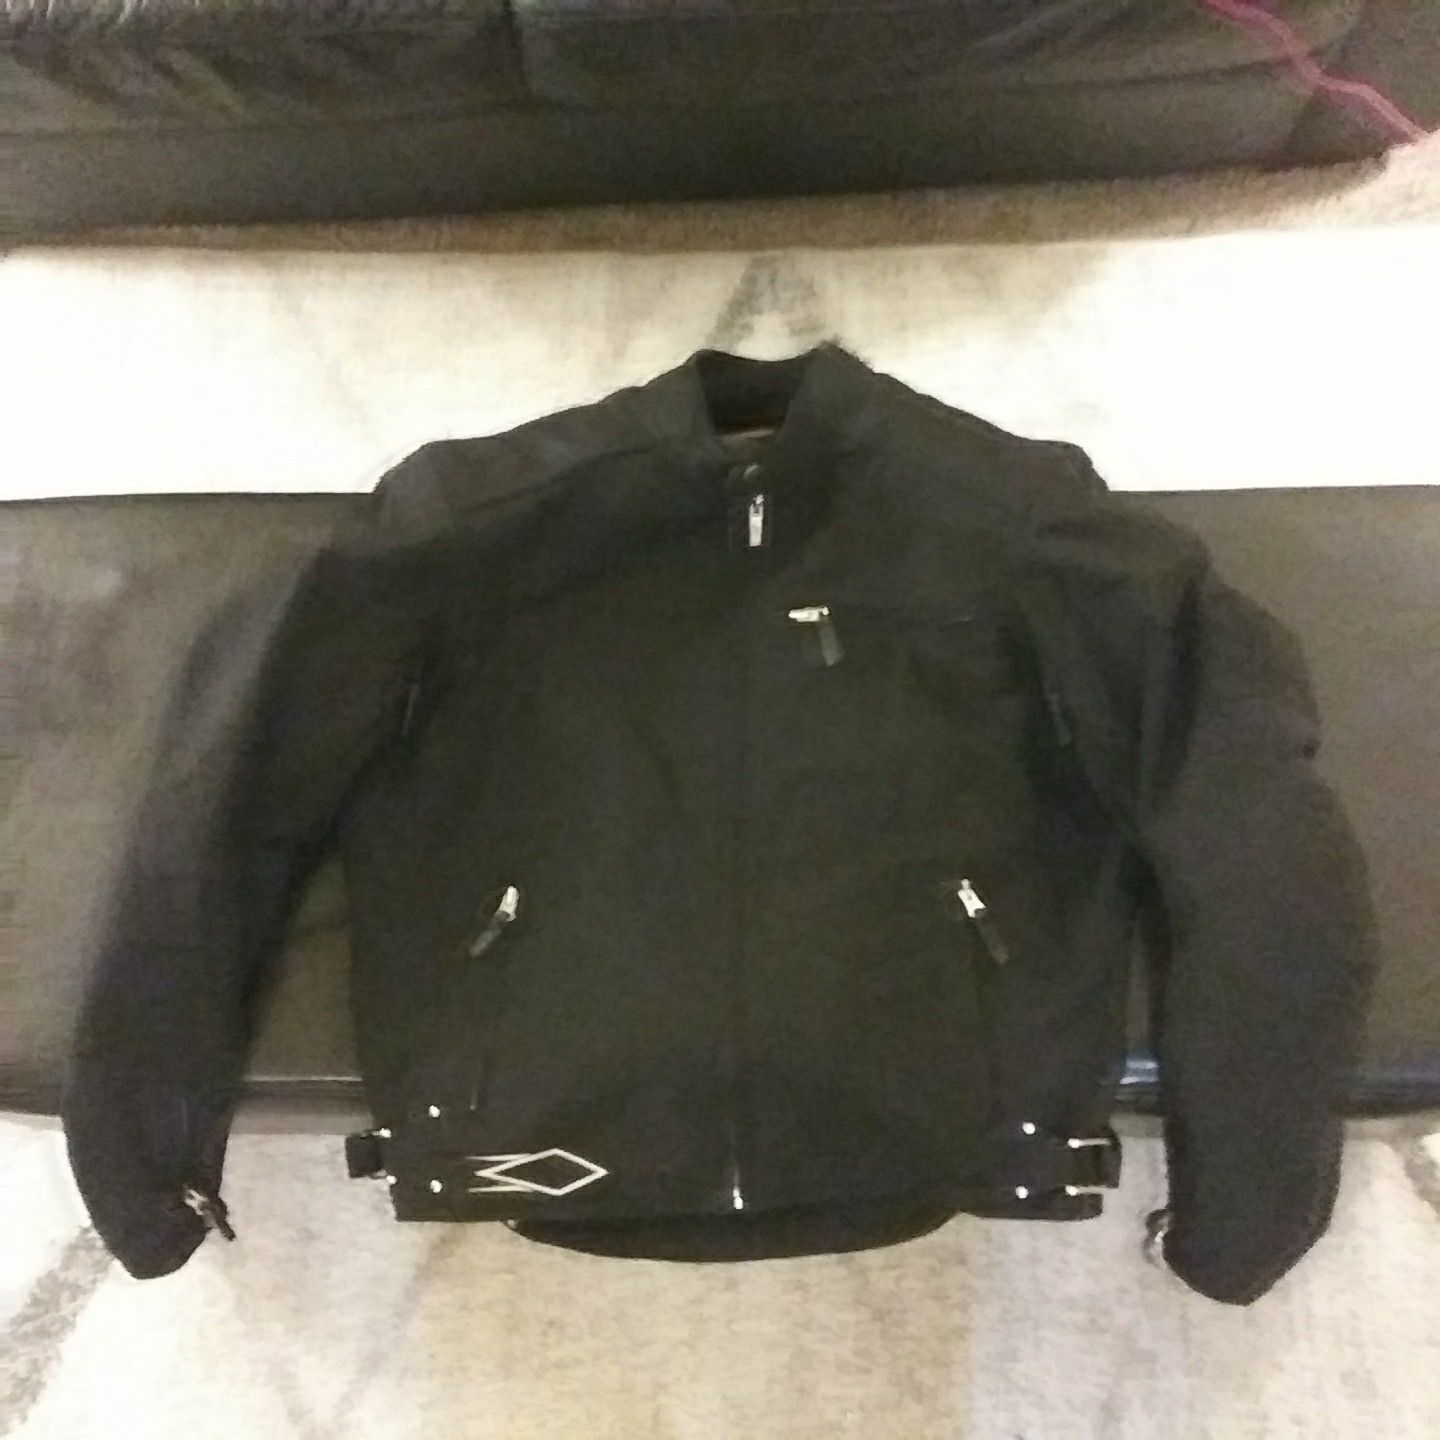 Armored waterproof motorcycle riding jacket size small